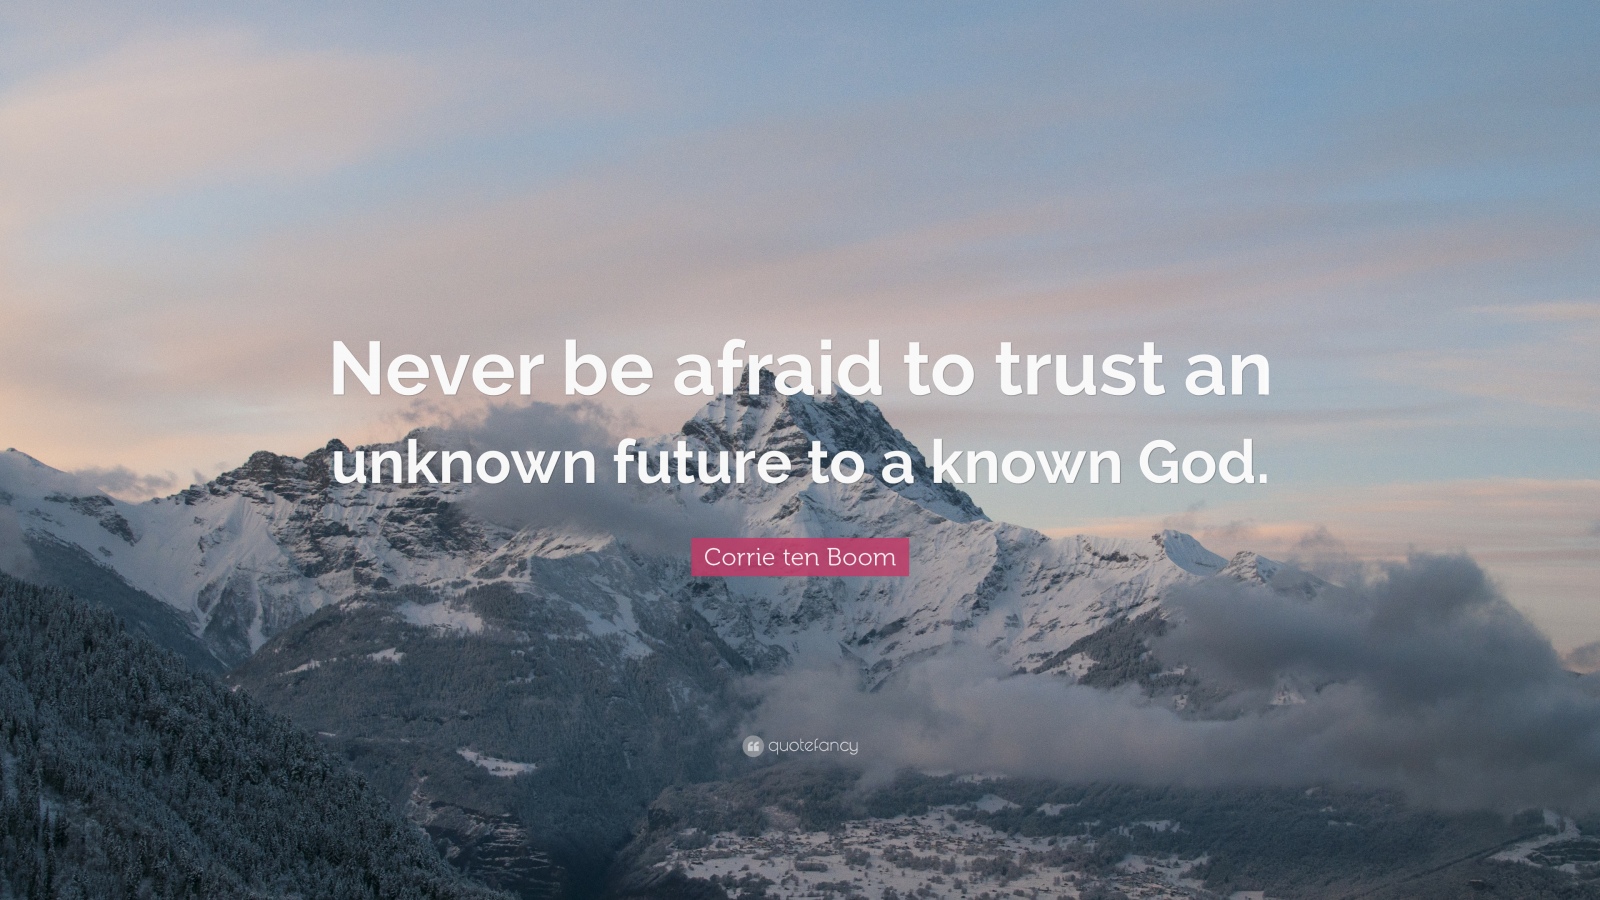 43450-corrie-ten-boom-quote-never-be-afraid-to-trust-an-unknown-future